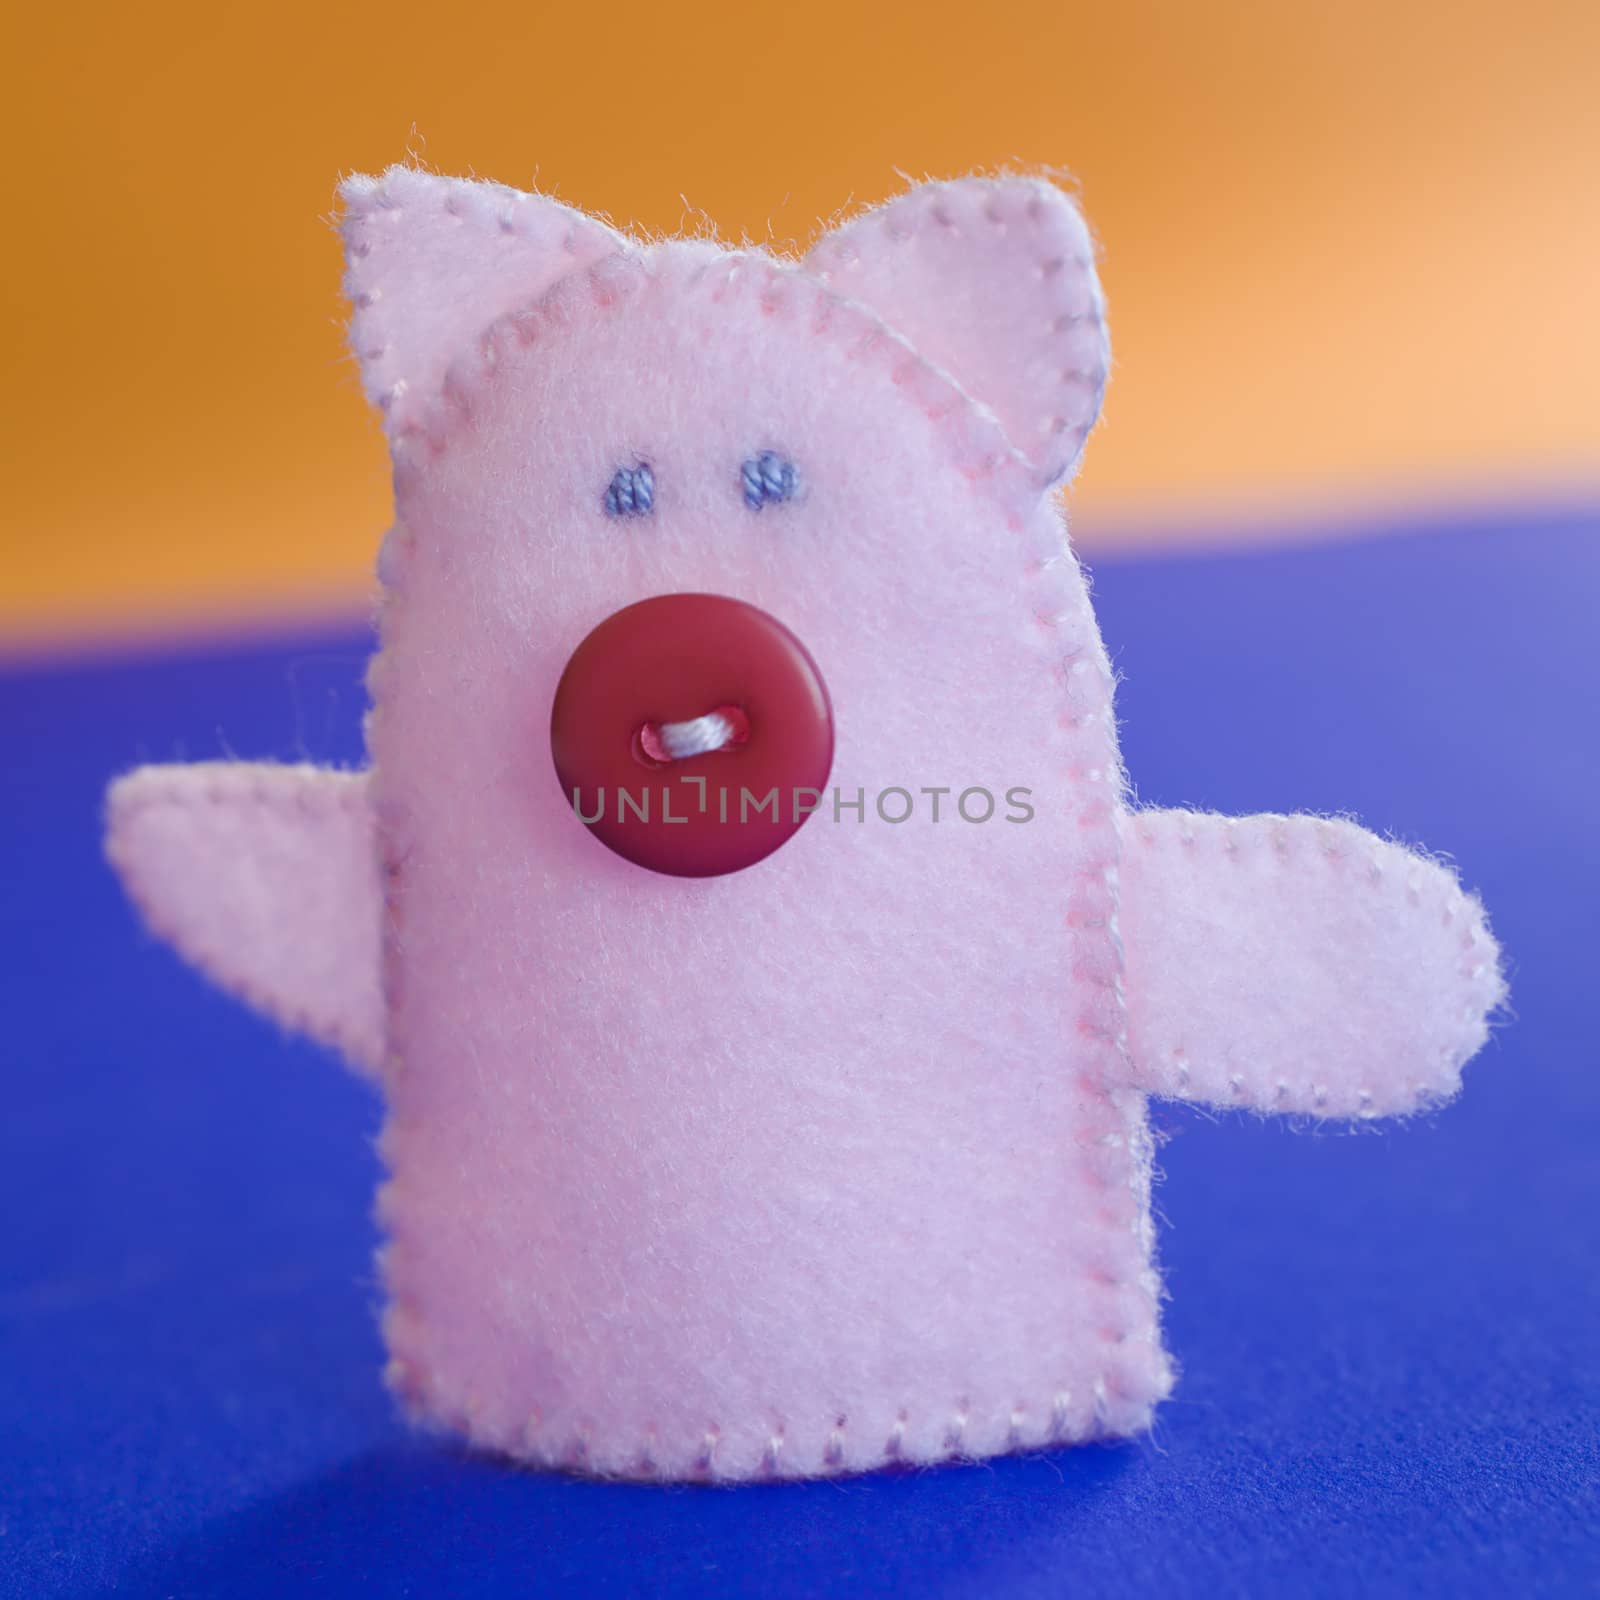 Finger puppet (farm animal: pig) on the table